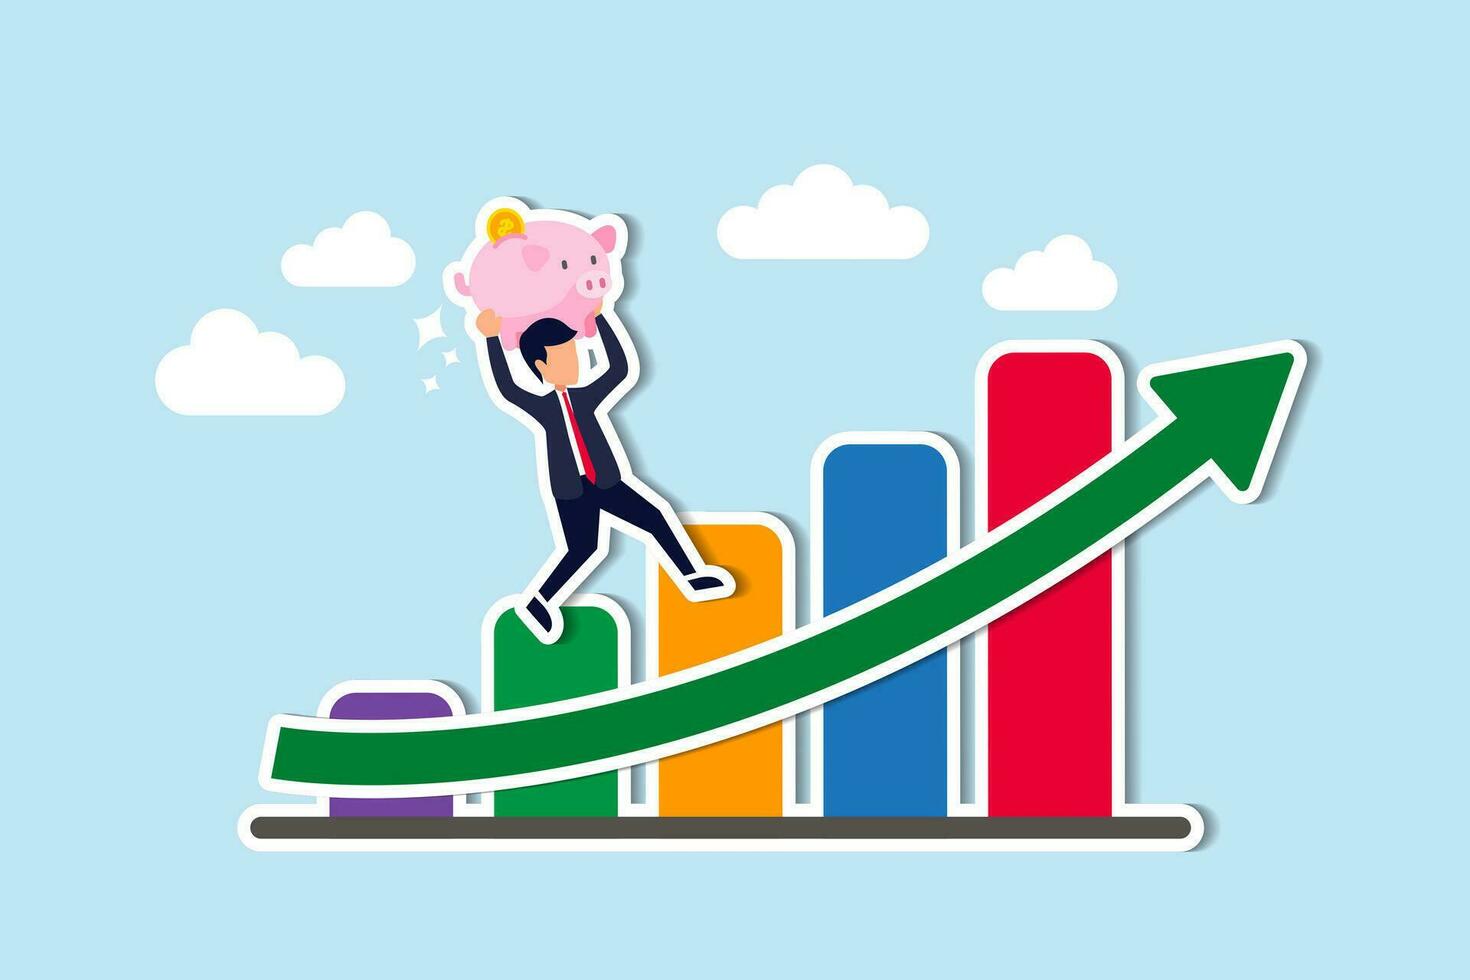 Growth stock, prosperity economic or growth return in savings and investment concept, confident businessman investor hold wealthy pink piggy bank walking up rising green arrow stock market bar graph. vector